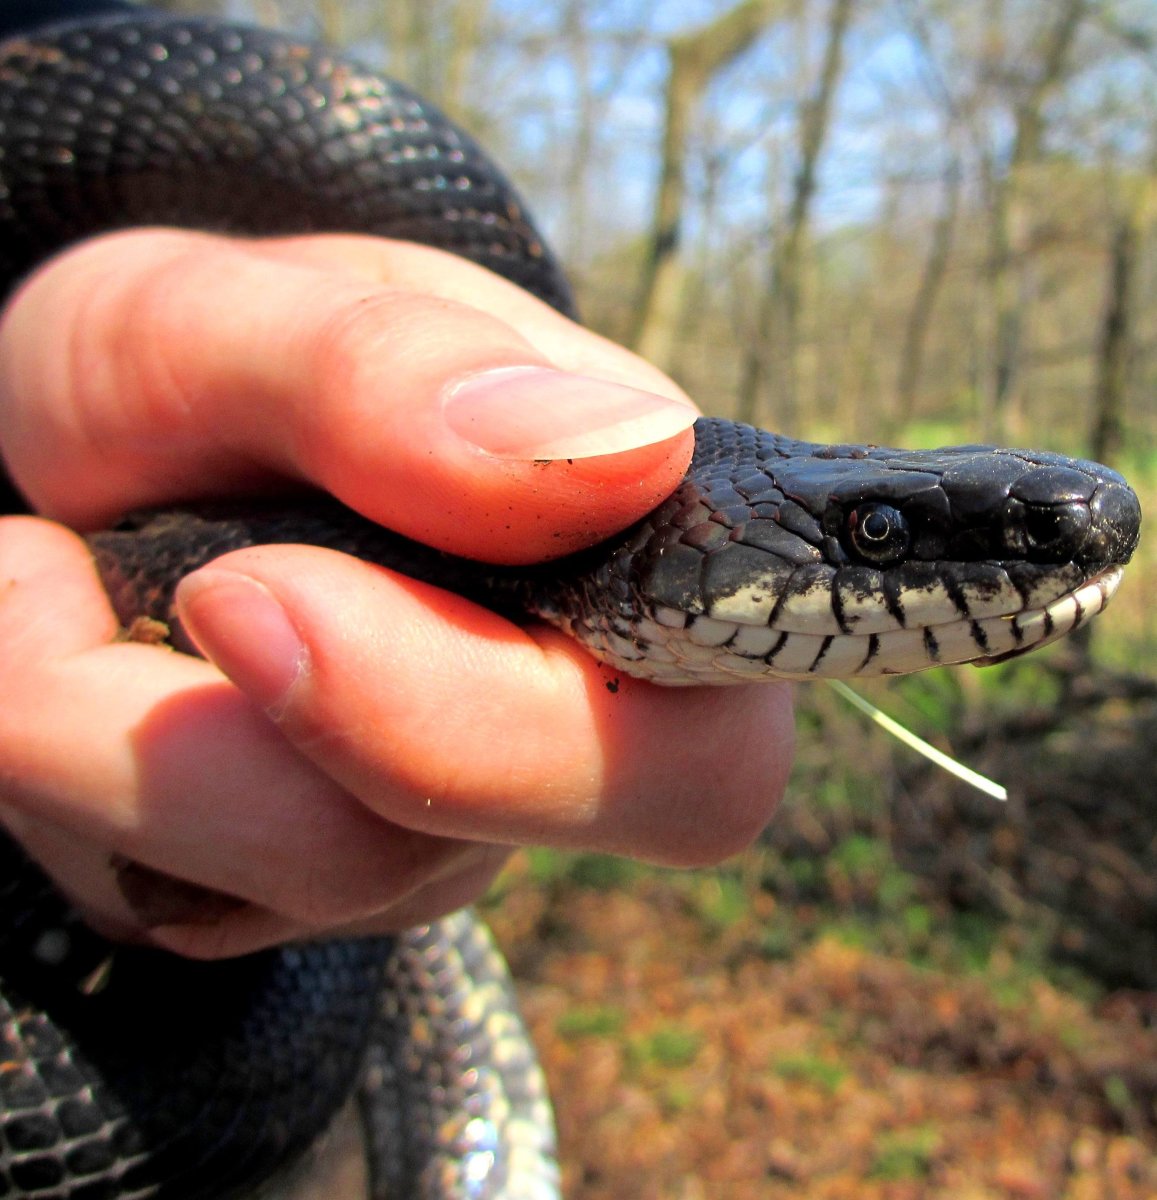 A nonvenomous Black Rat Snake (Pantherophis obsoletus) being carefully restrained in an effort to get a good view of its head.  Pic taken by Jake Houser.